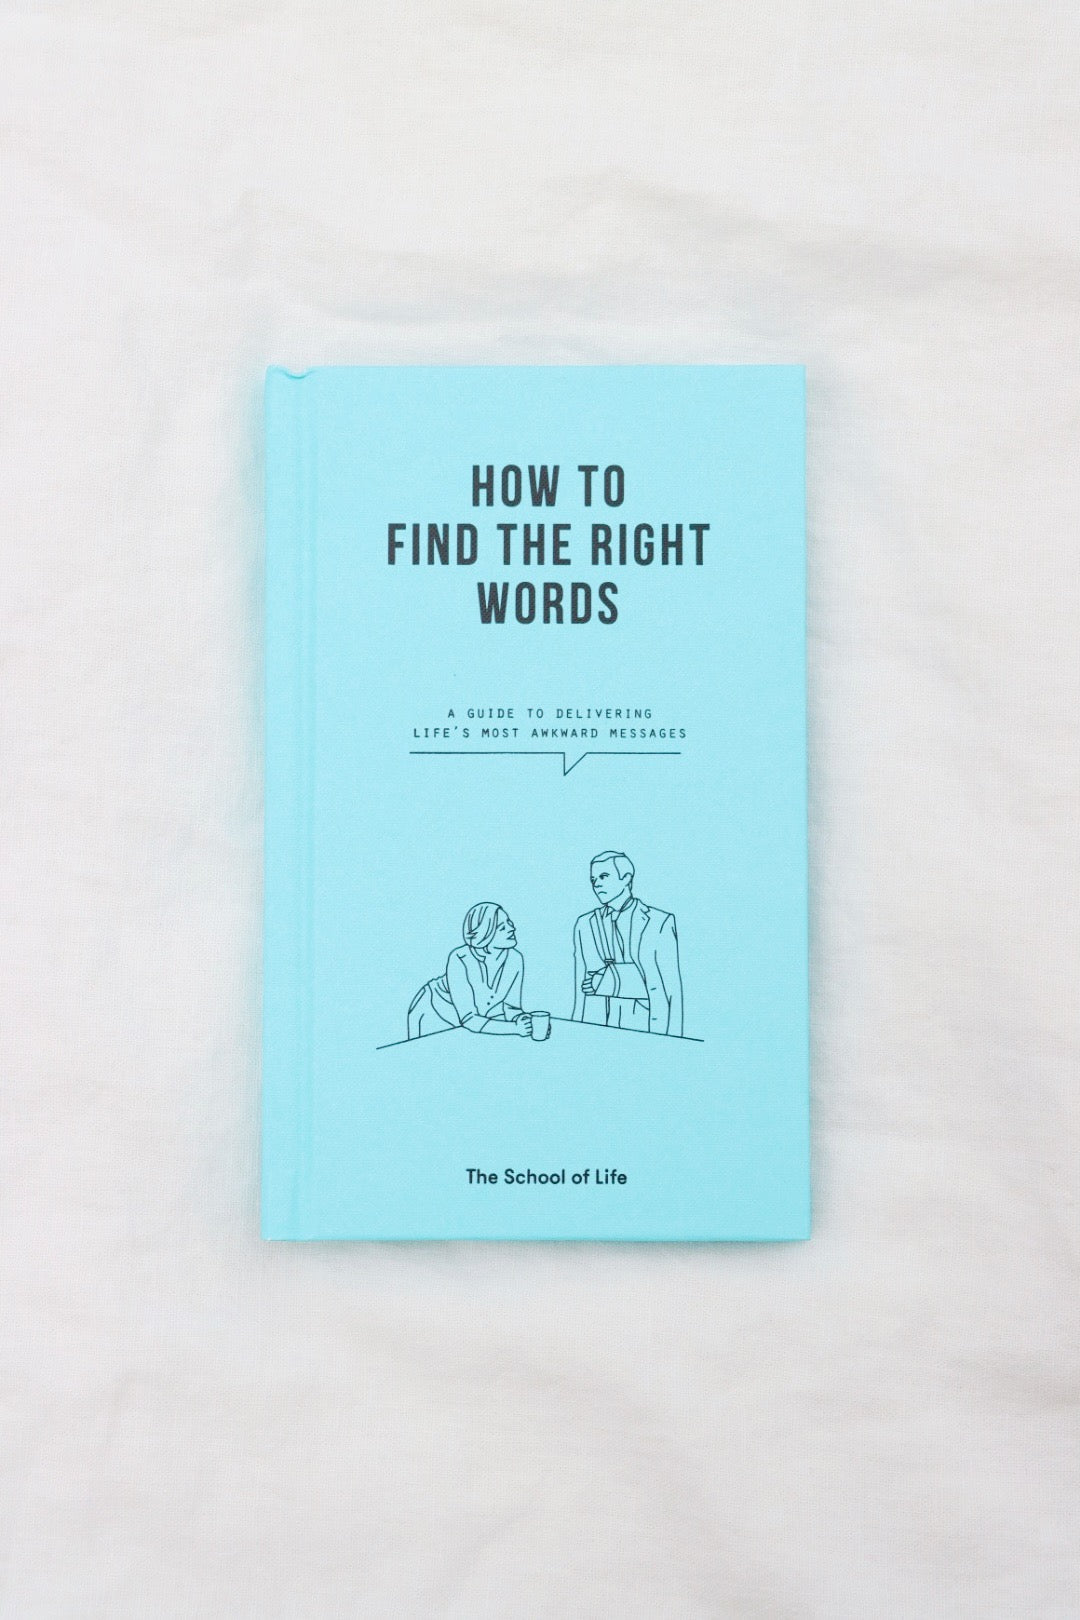 How To Find The Right Words